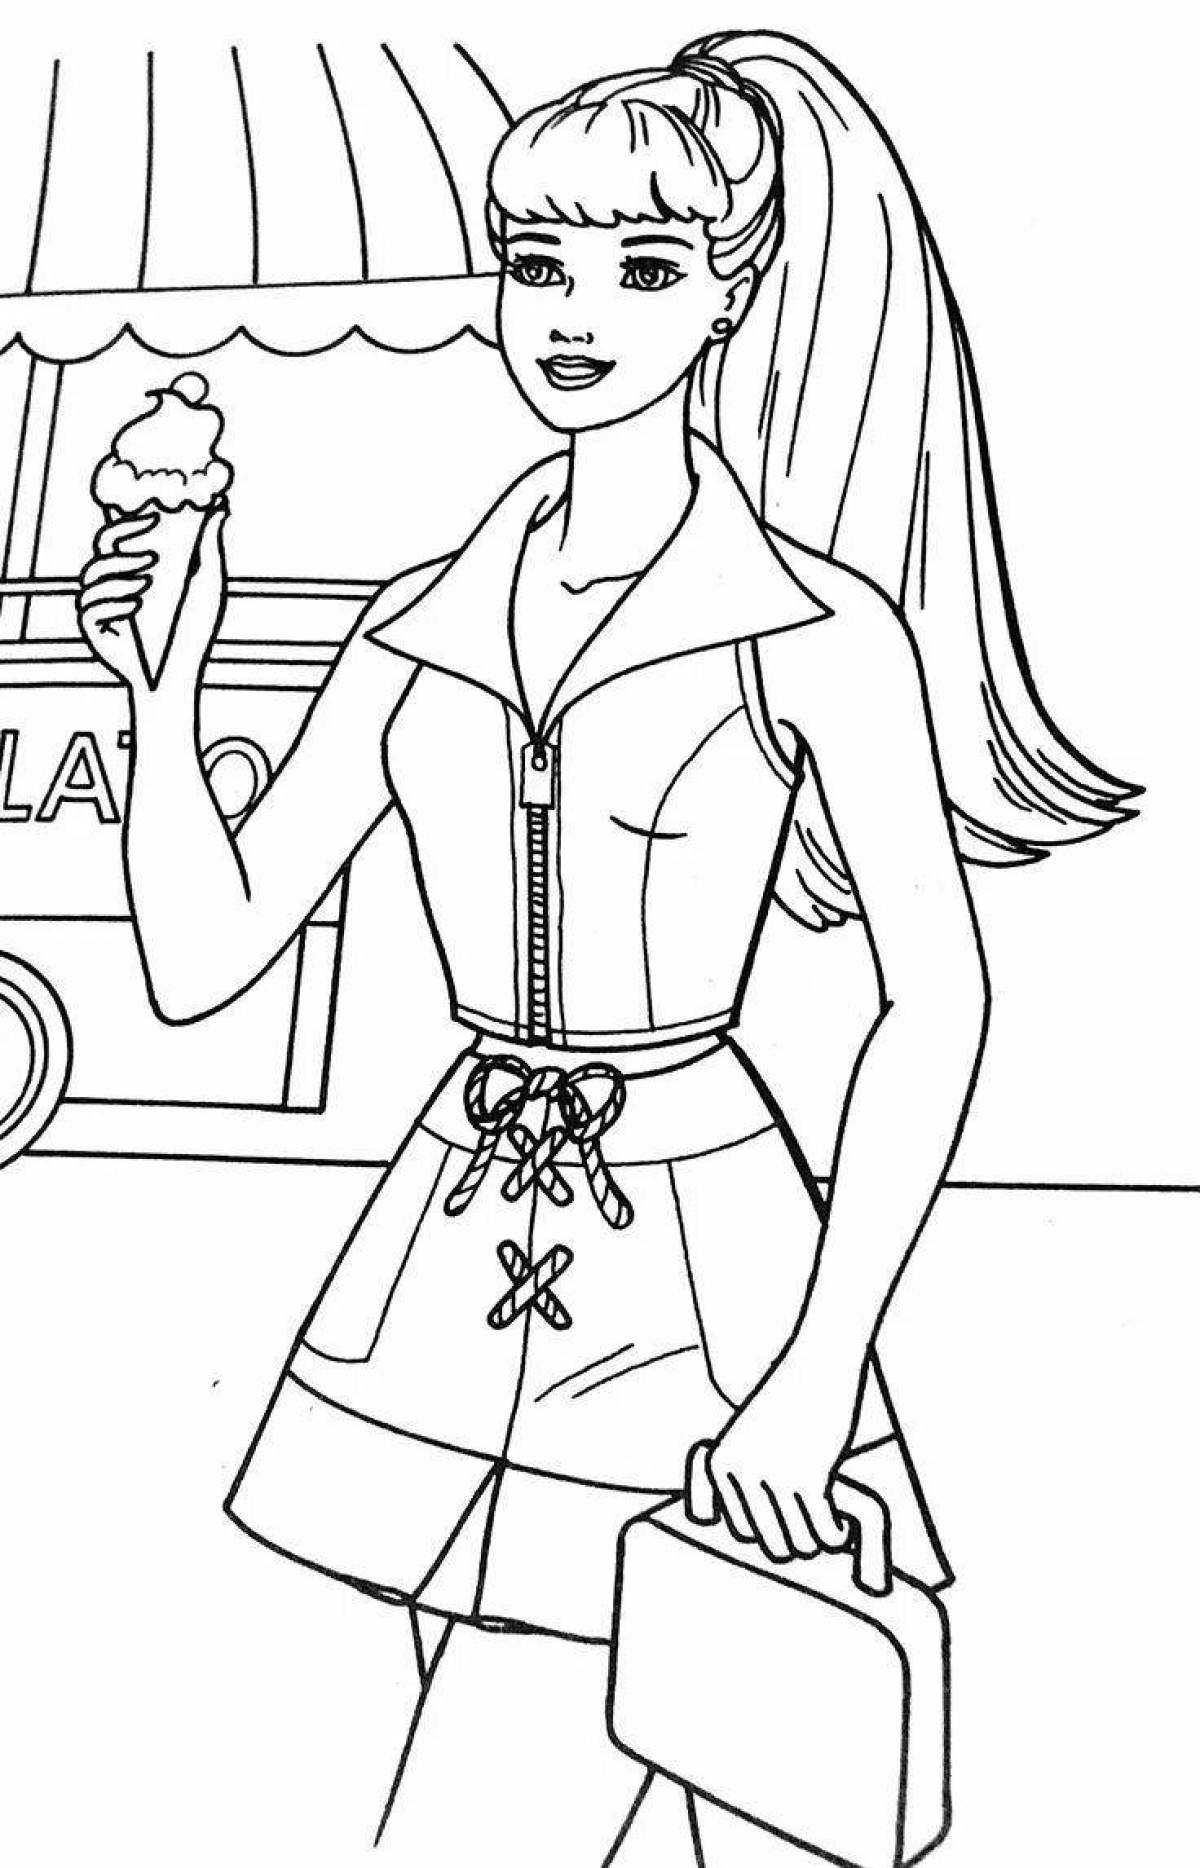 Live 90s barbie coloring book